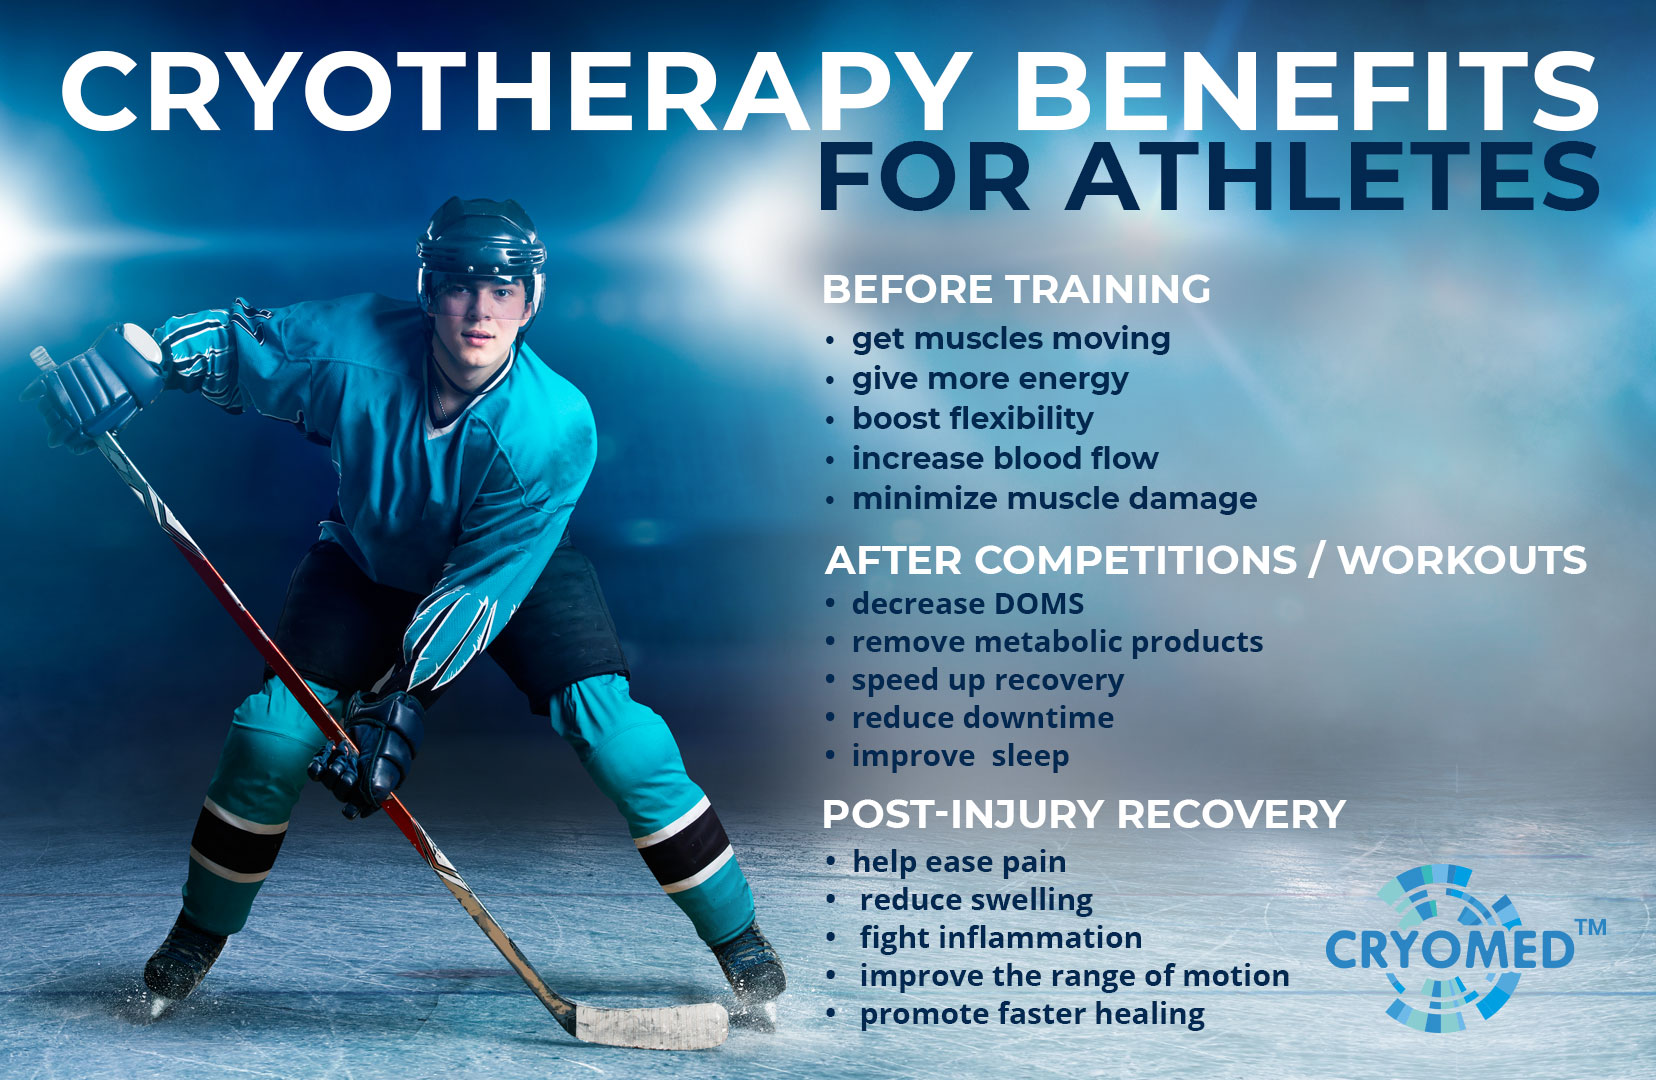 benefits of whole body cryotherapy